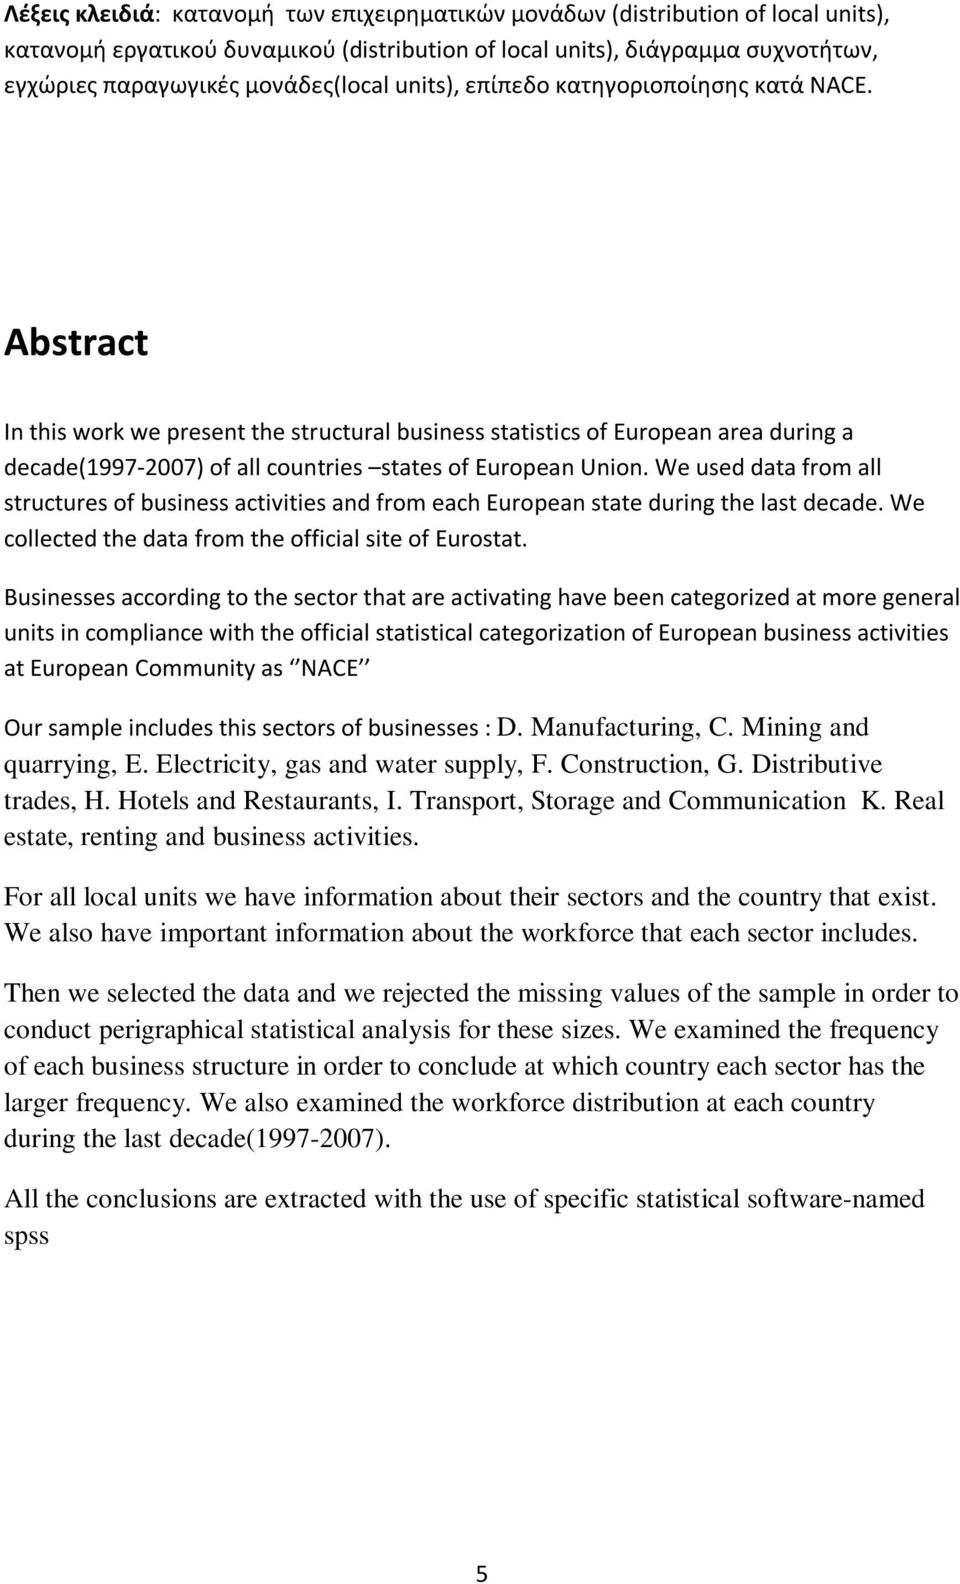 Abstract In this work we present the structural business statistics of European area during a decade(2007) of all countries states of European Union.